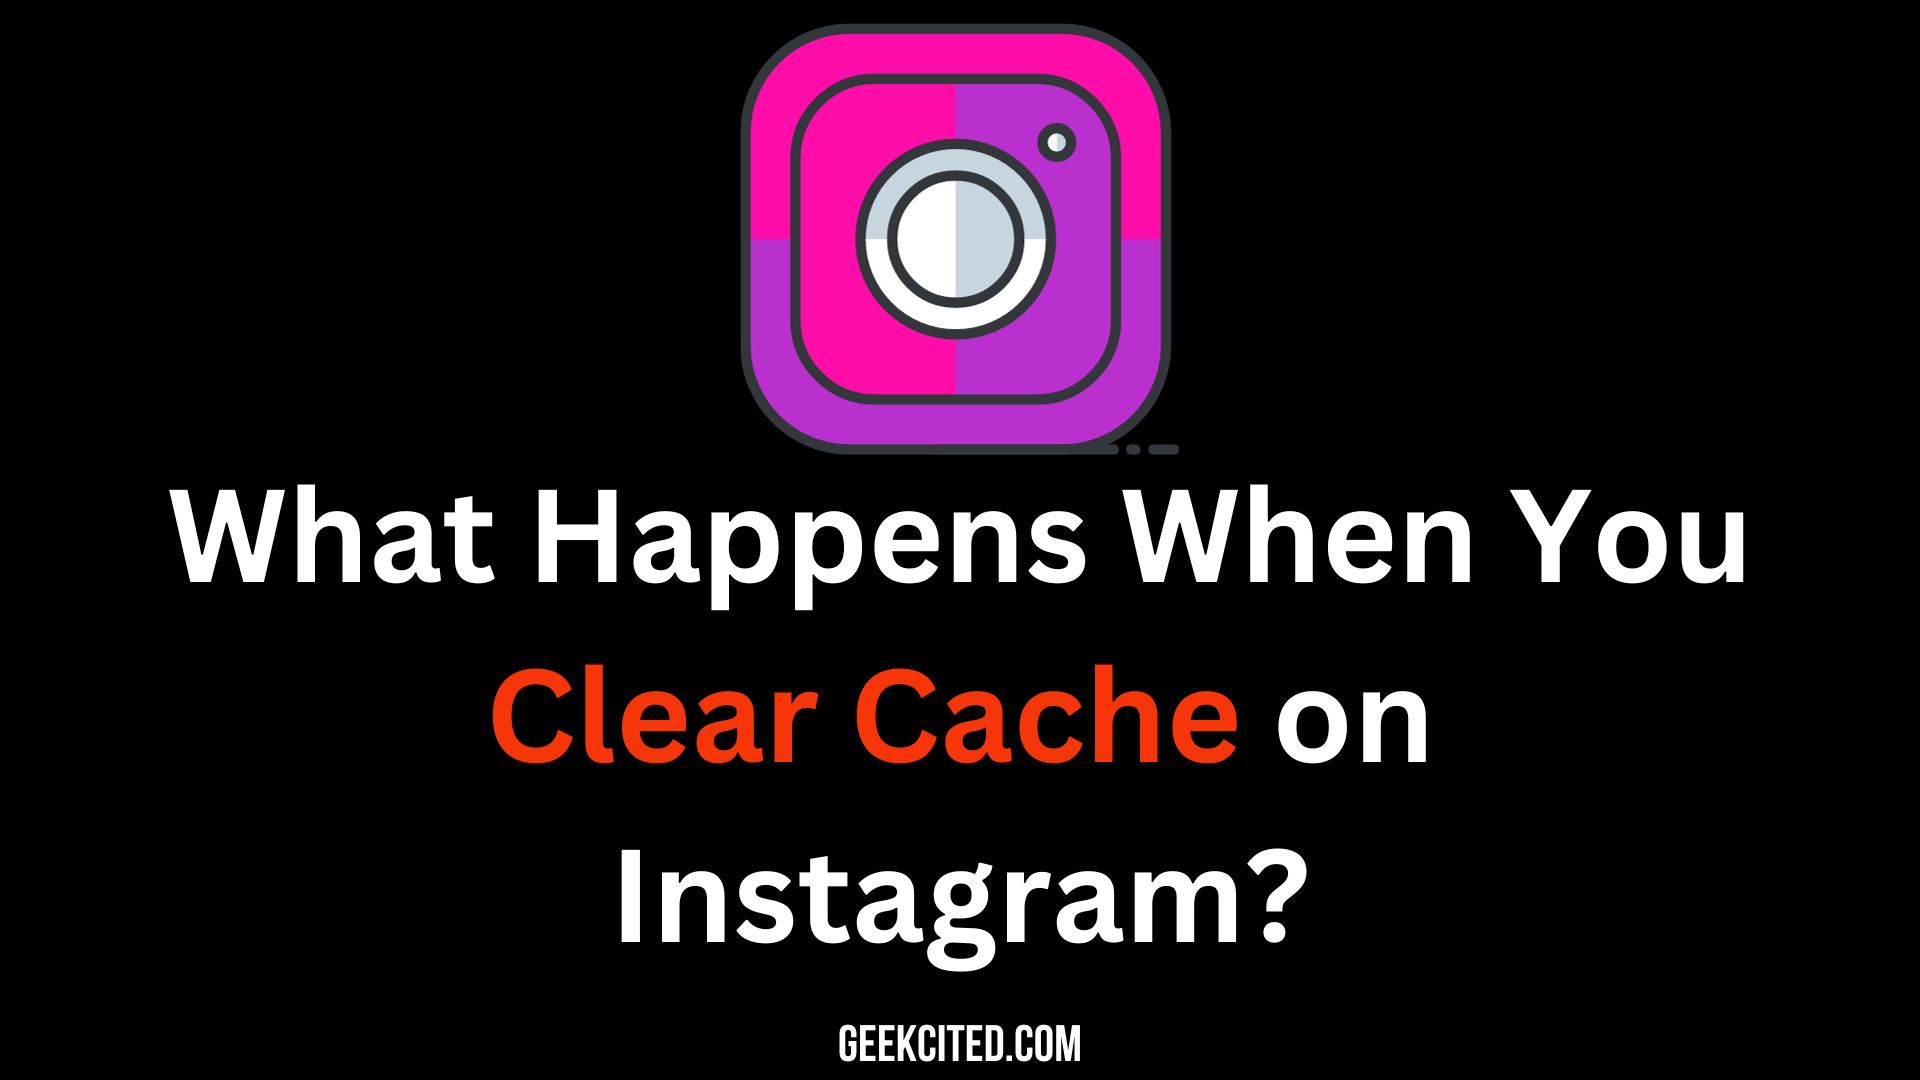 What Happens When You Clear Cache on Instagram